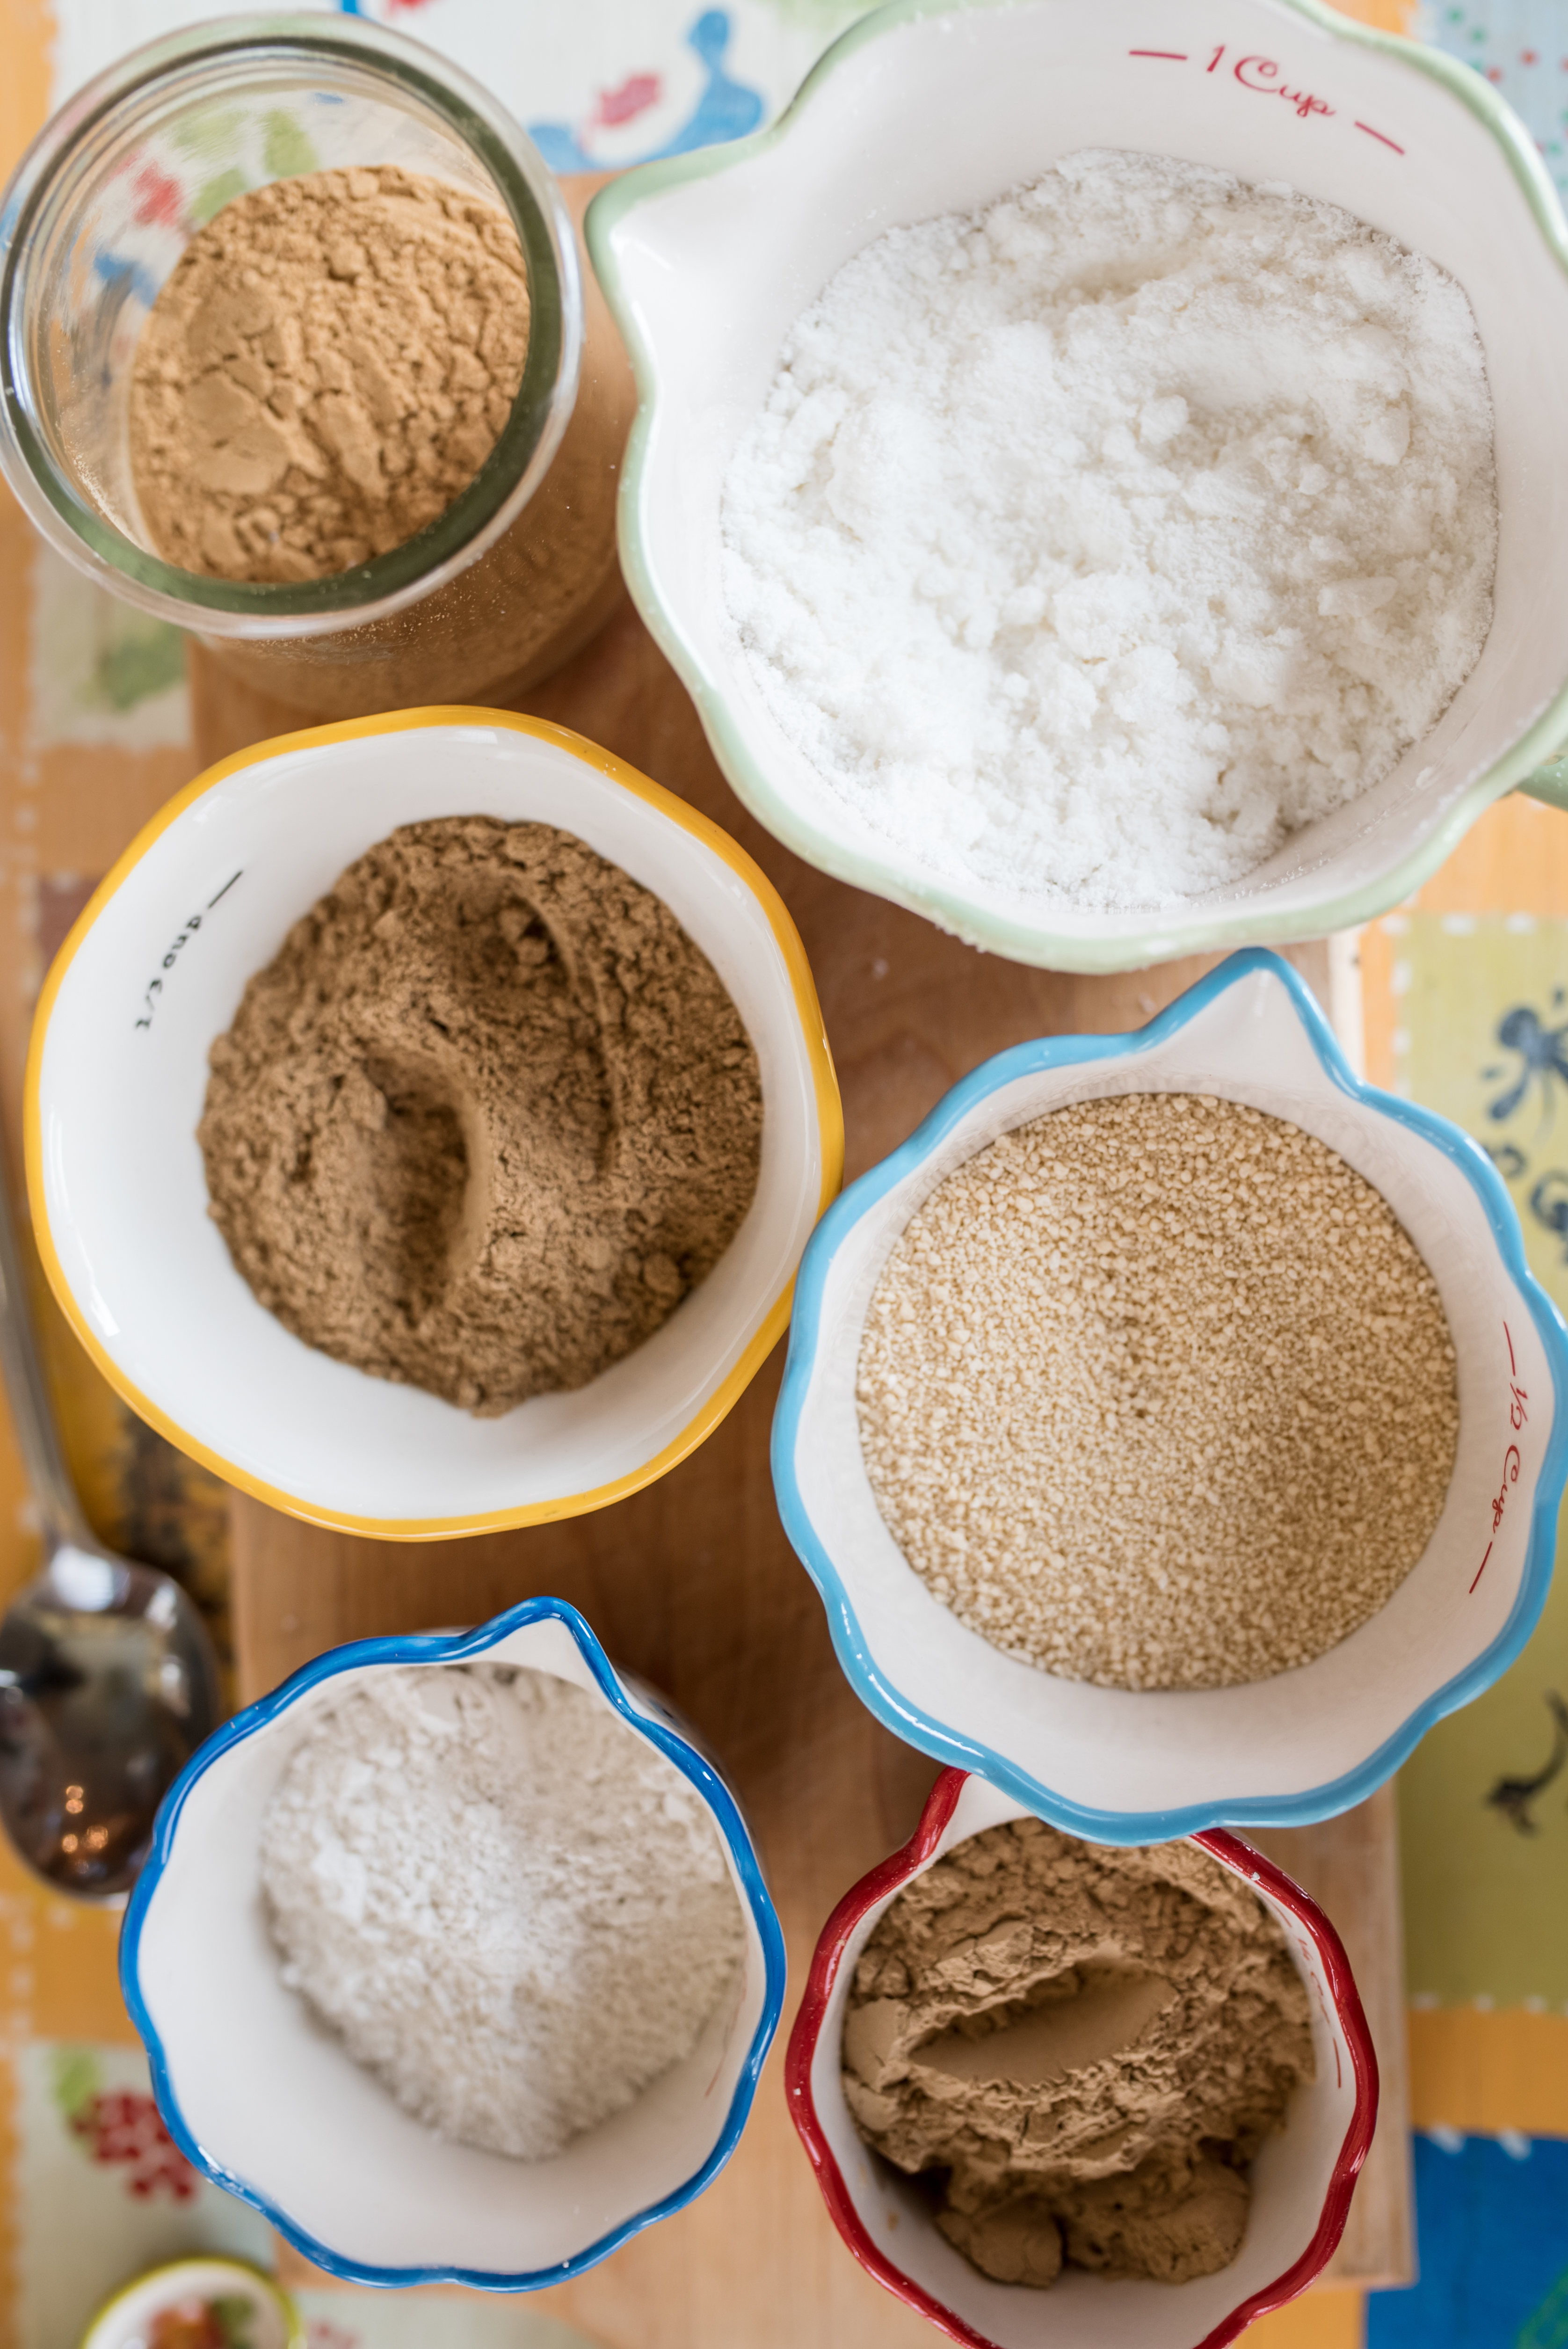 6 small colorful bowls filled with powdered ingredients for heartburn ginger tea